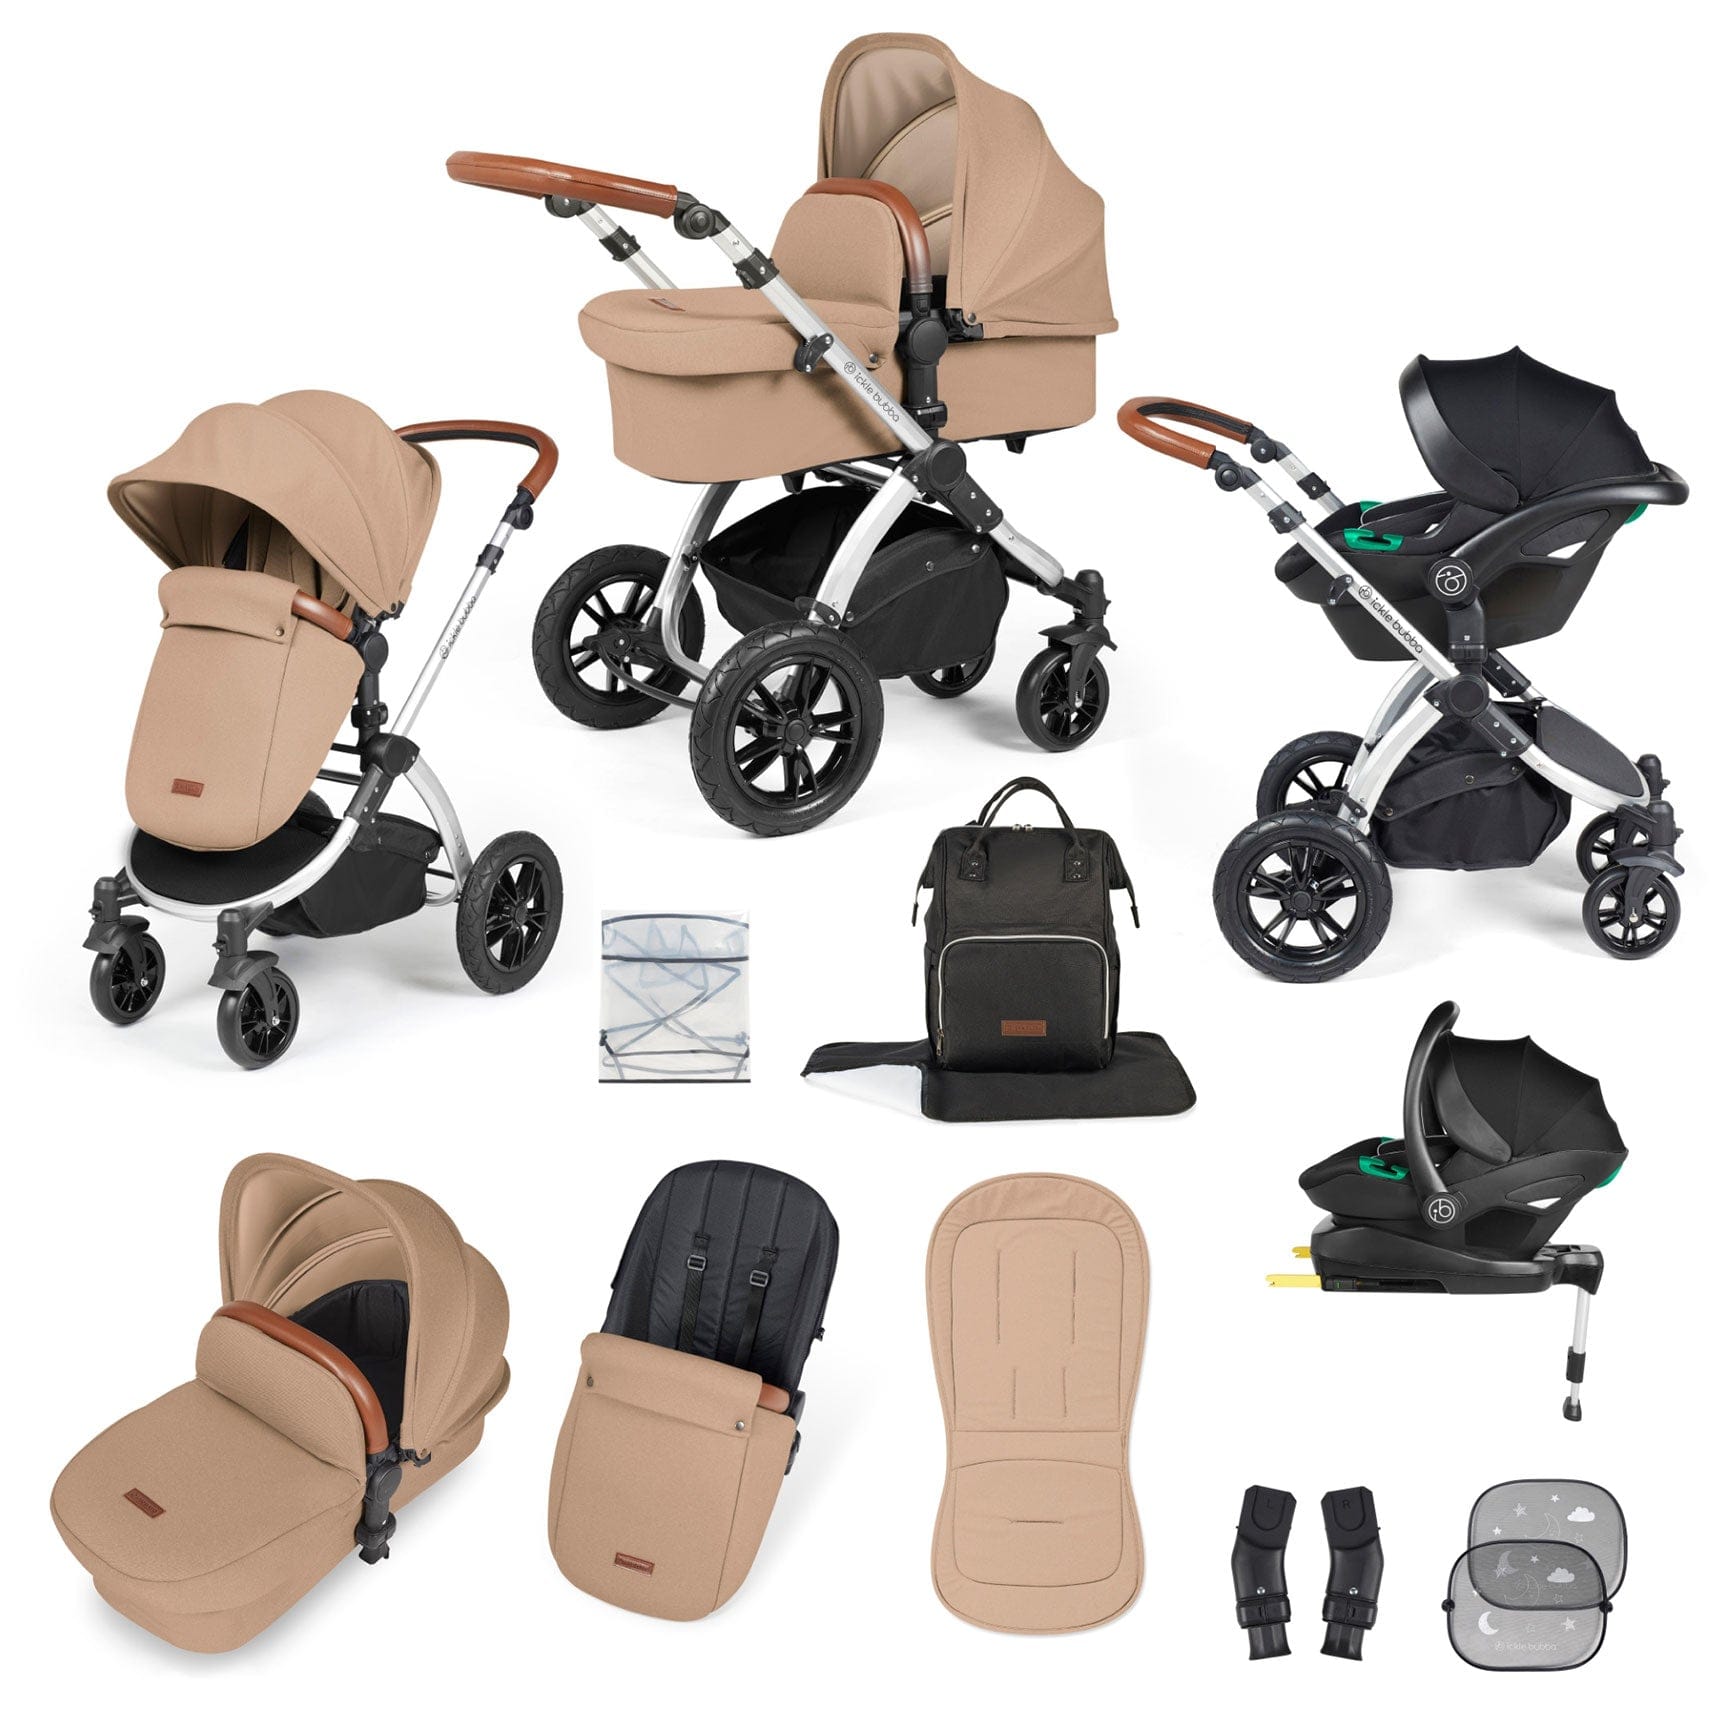 Ickle Bubba travel systems Ickle Bubba Stomp Luxe All-in-One Travel System with Isofix Base - Silver/Desert/Tan 10-011-300-258